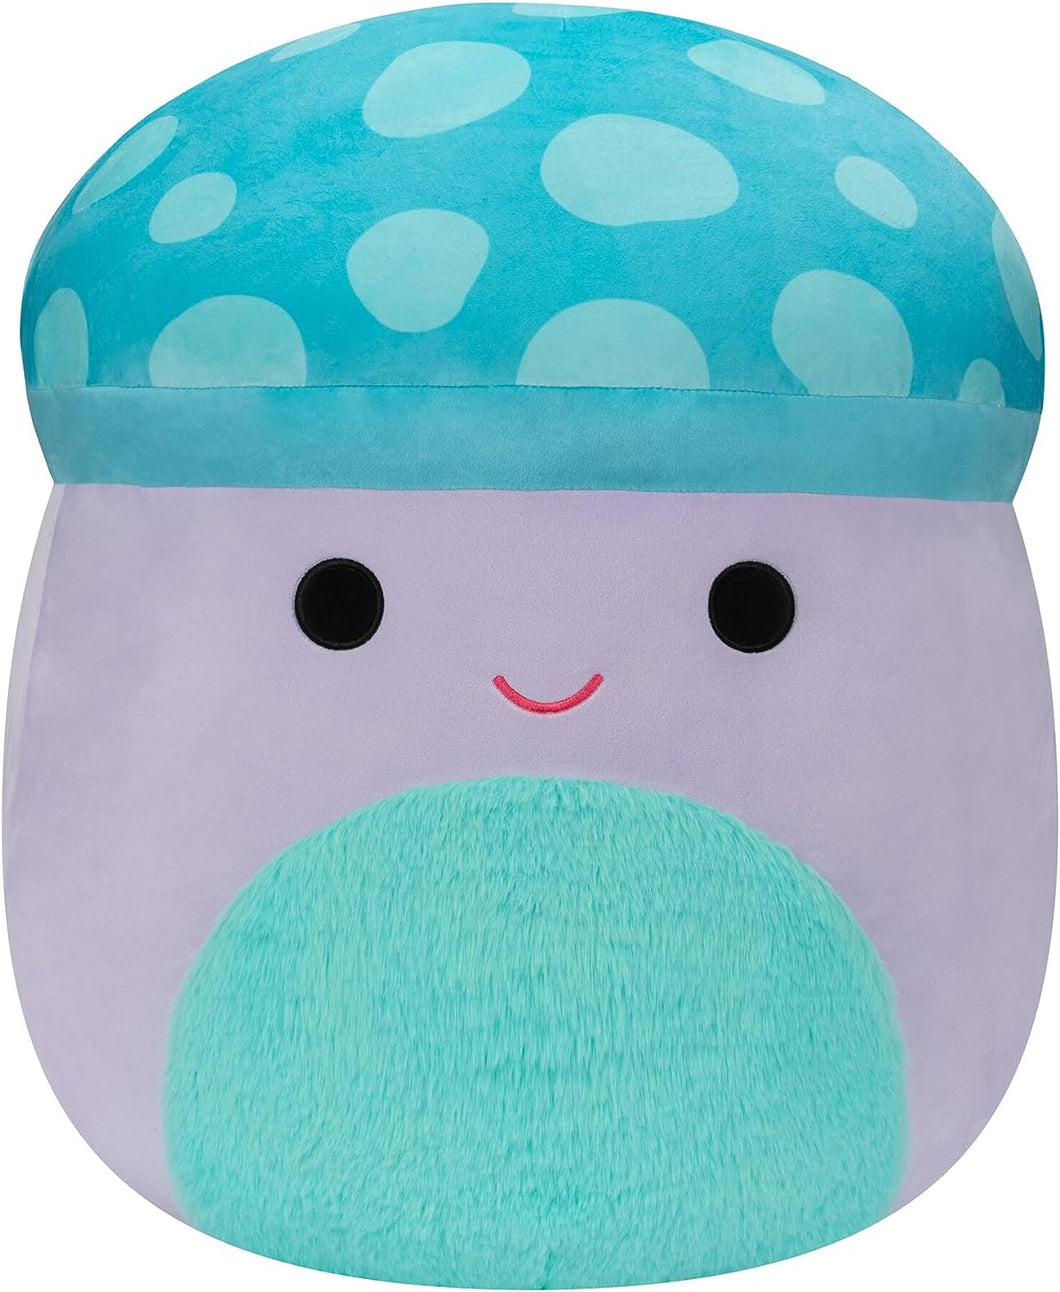 Squishmallows Pyle the Mushroom with Fuzzy Belly 8